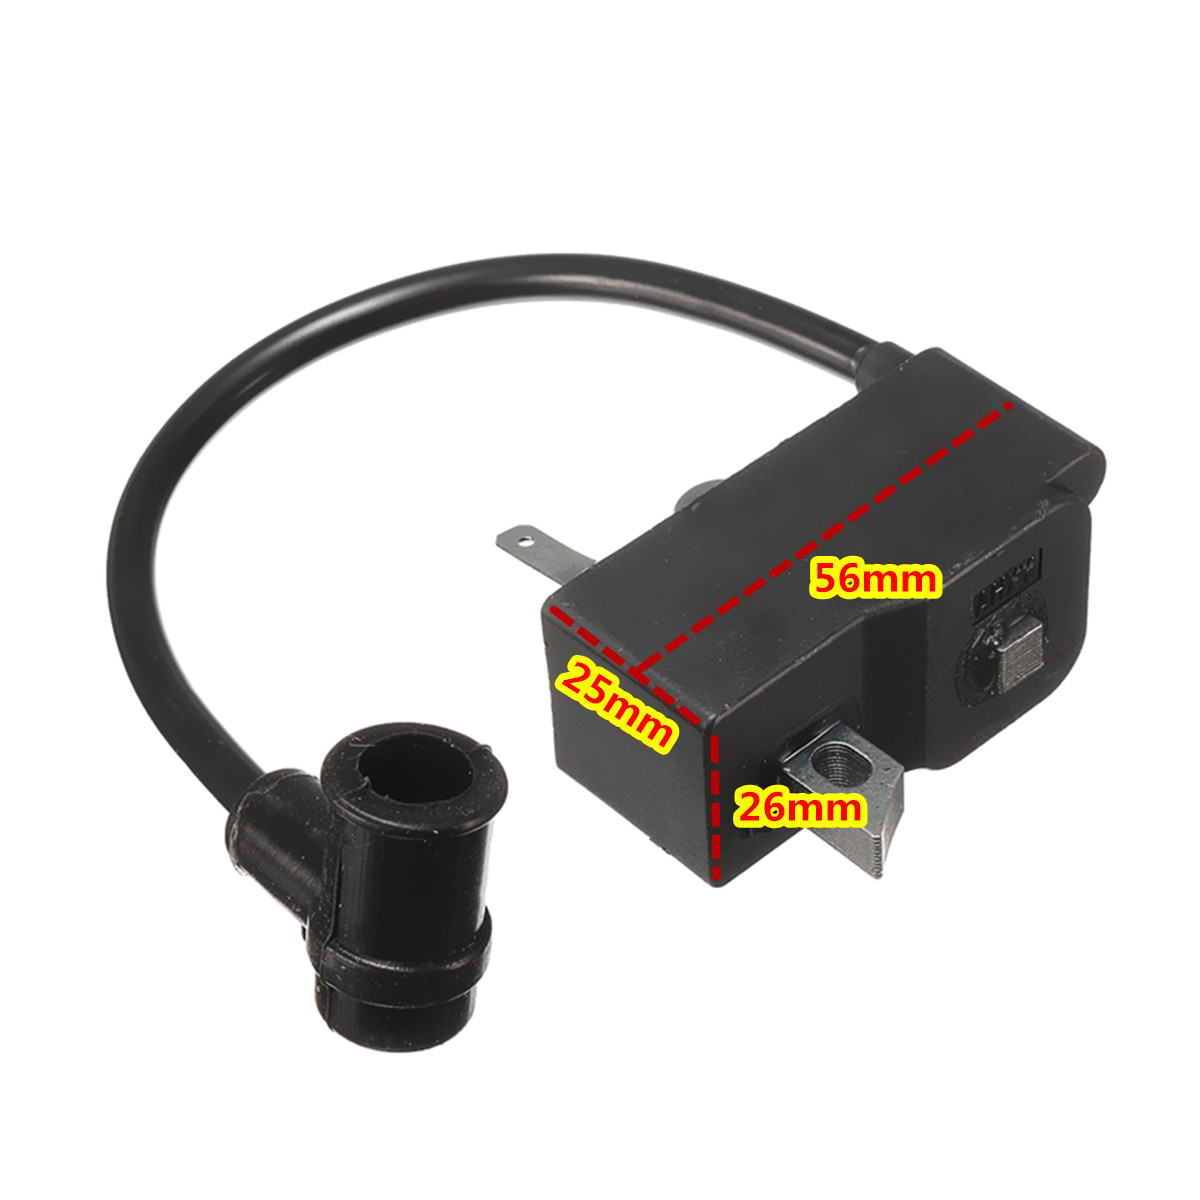 Gardening Chainsaw Ignition Coil Spark Plug Replacement for Stihl FS75 FS80 FS85